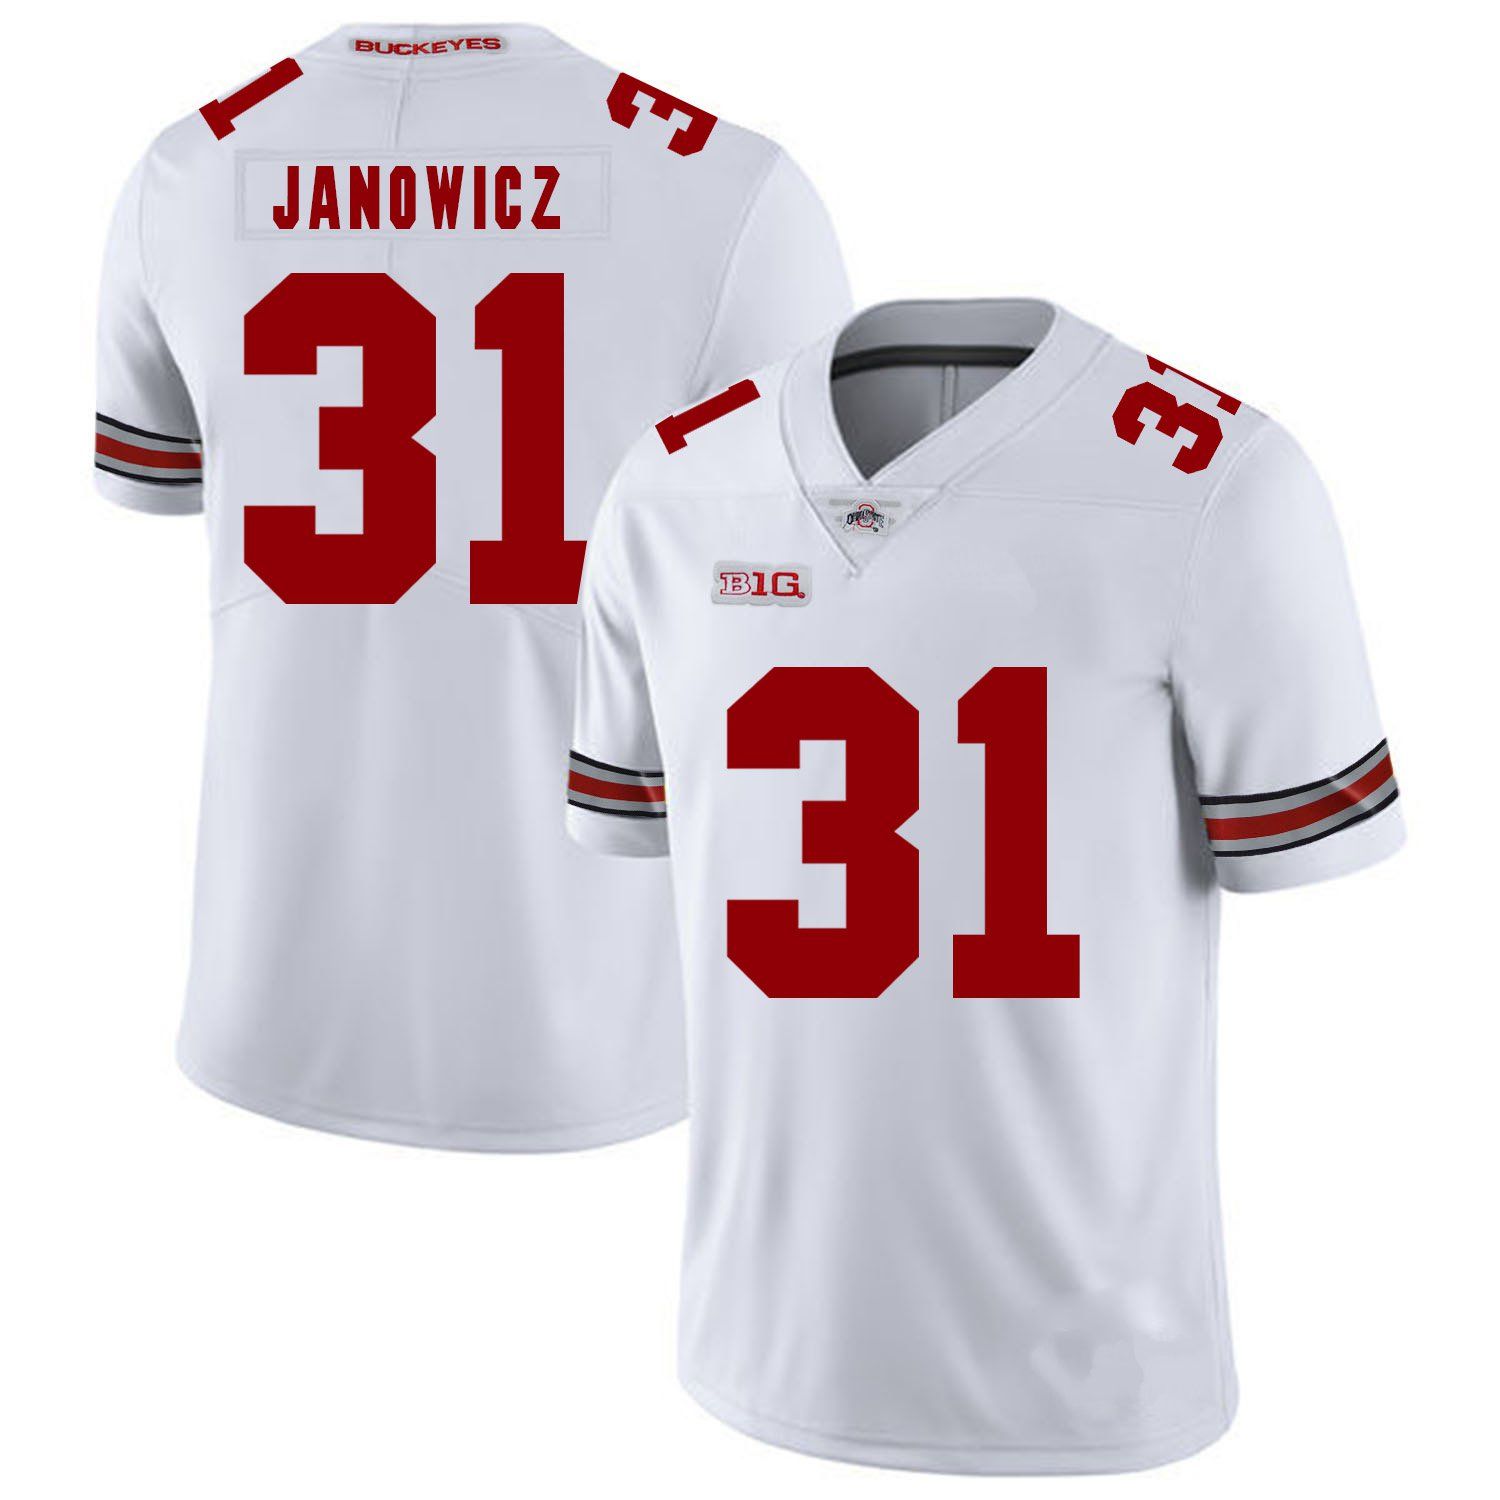 youth ohio state football jersey